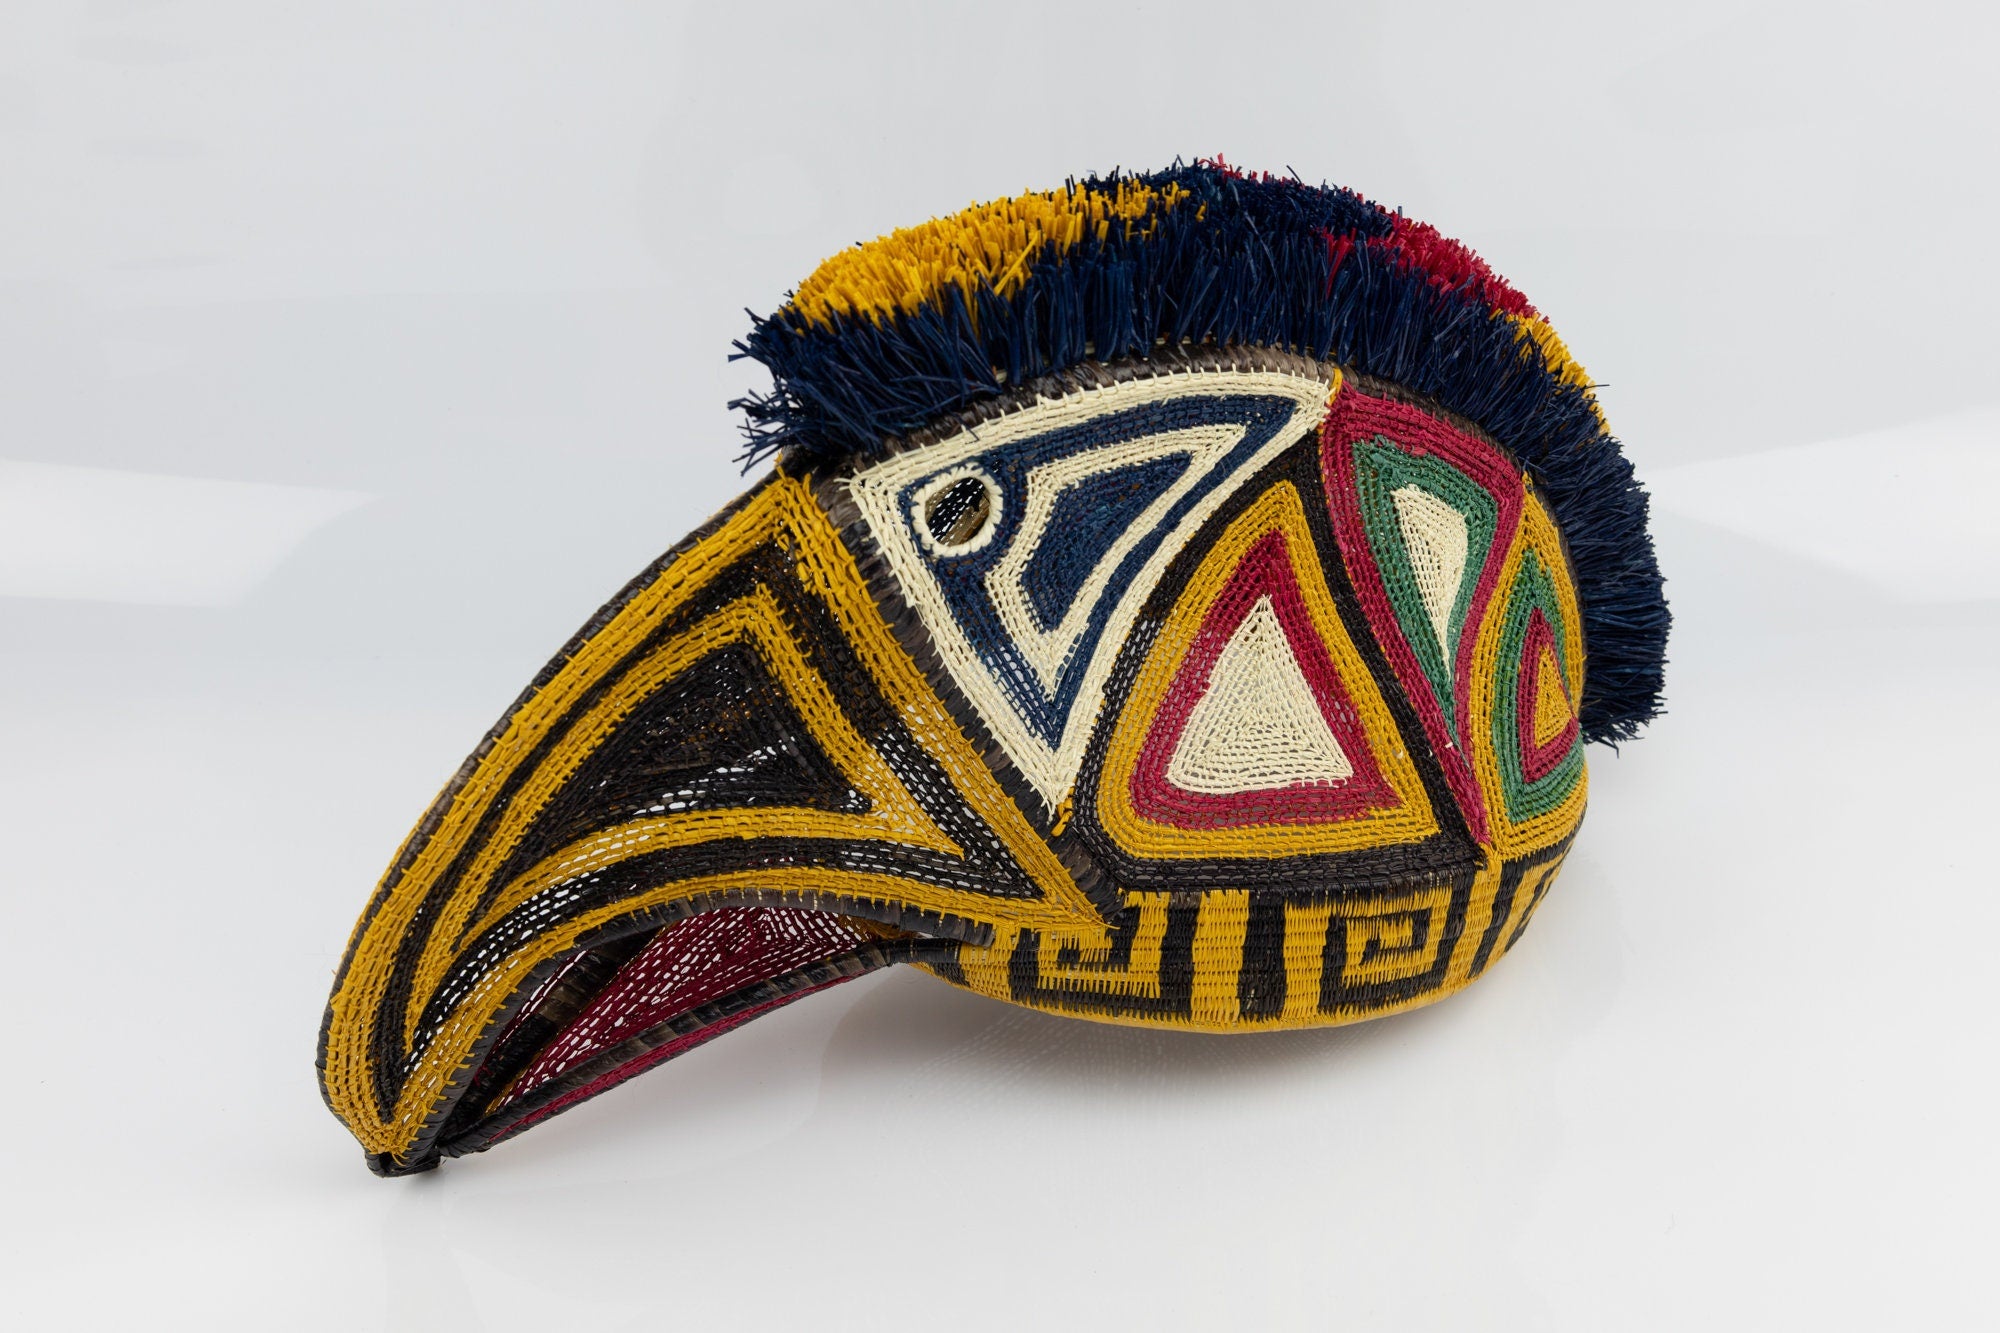 Hand Woven Large Parrot Bird Mask Made By Wounaan And Emberá Panama Indians. Makes Great Wall Decor, Rainforest Art, Decorative Mask